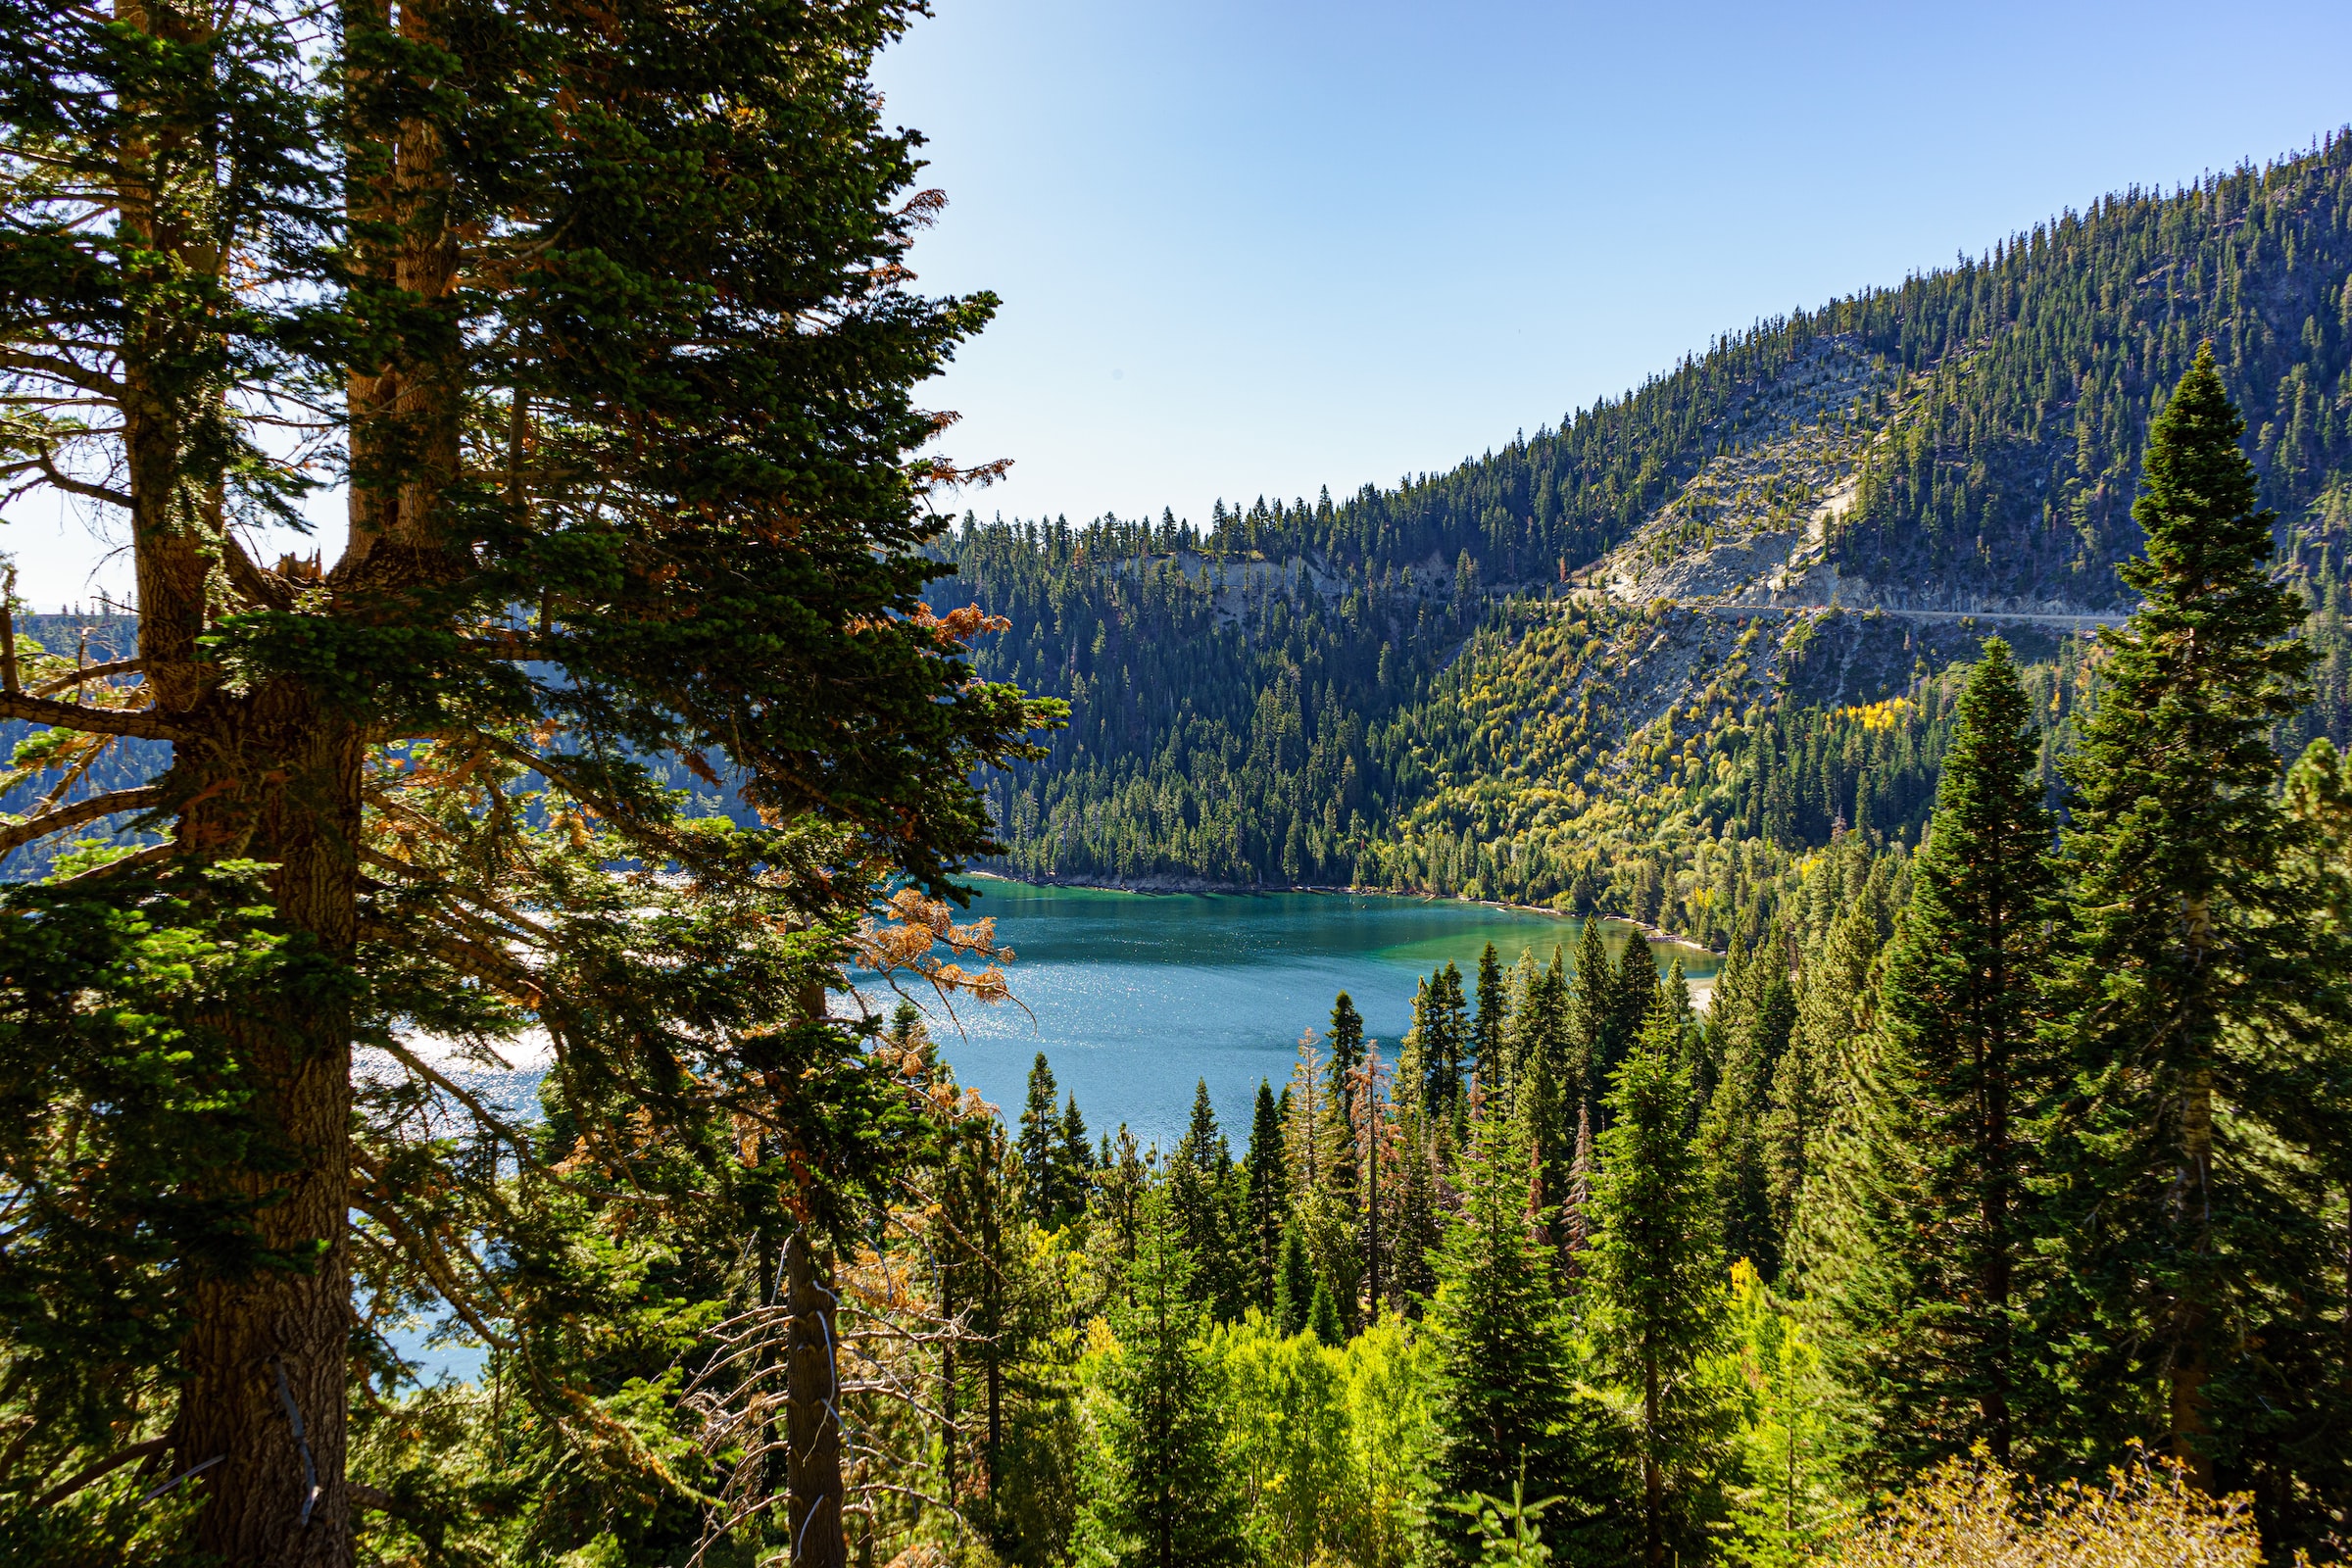 Lake Tahoe shoreline, displaying the health of the forest